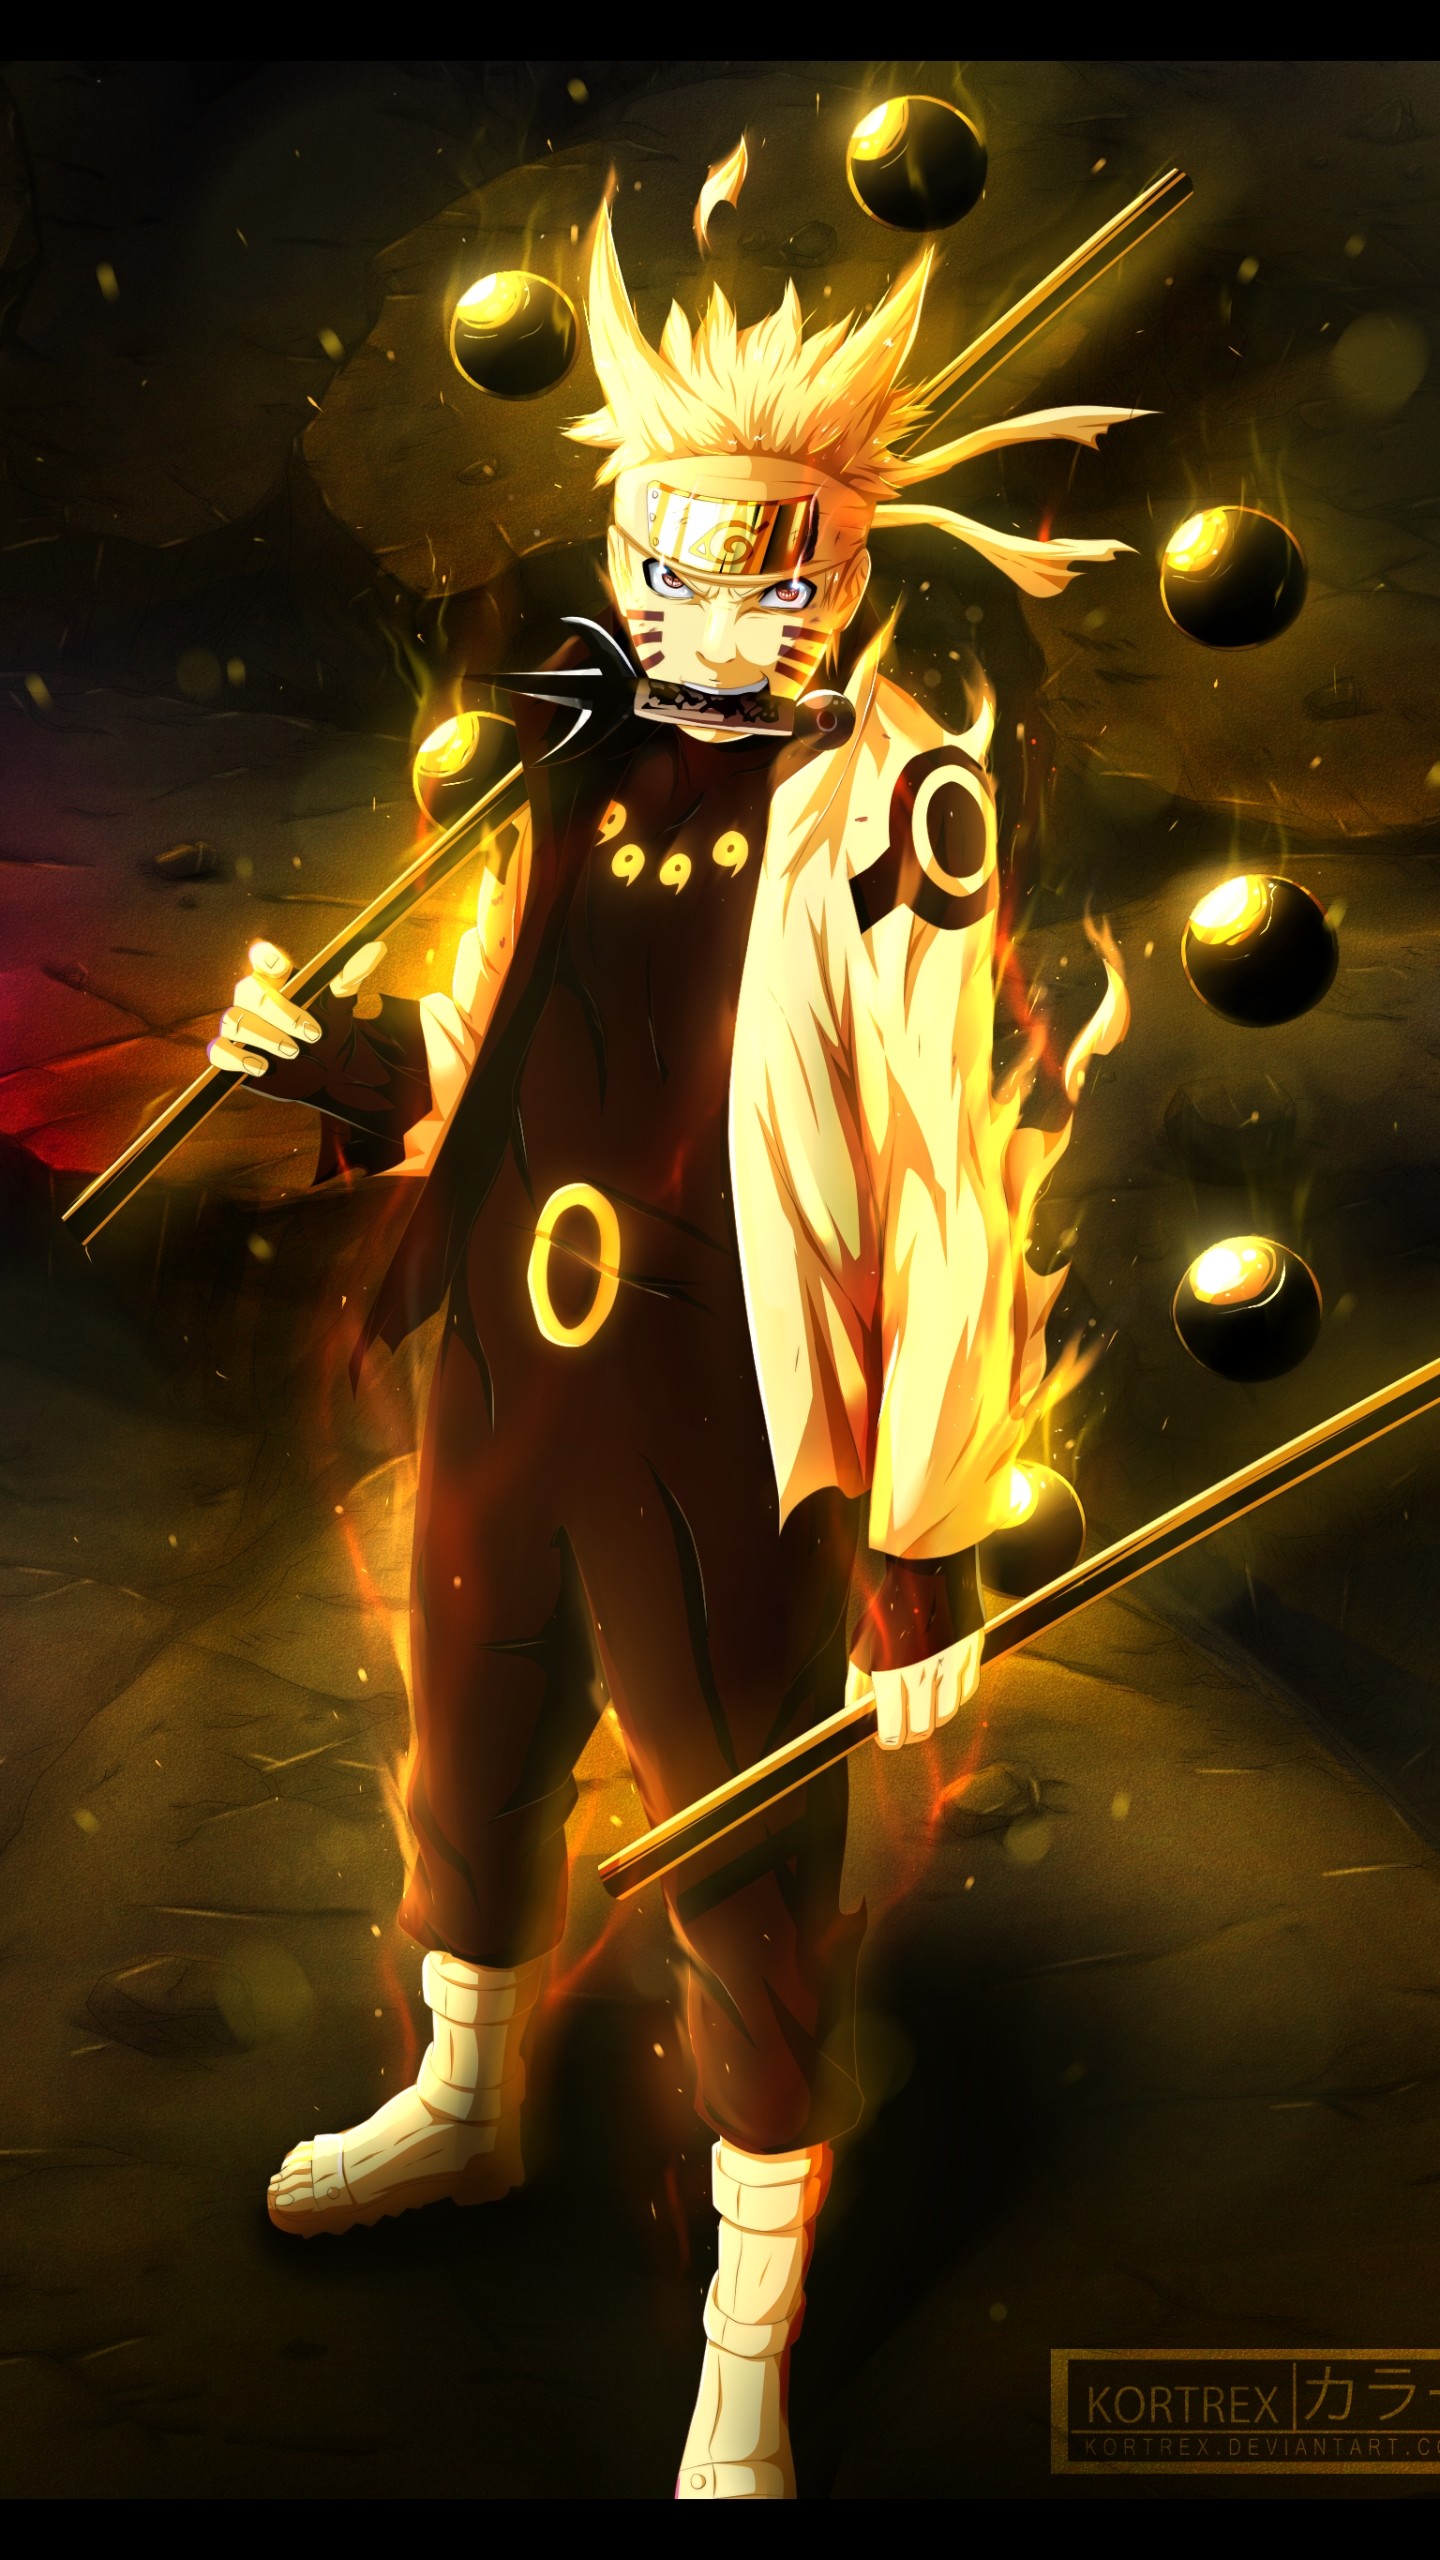 1440x2560 25+ trending Best naruto wallpapers ideas on Pinterest | Naruto art, Naruto  team 7 and Naruto